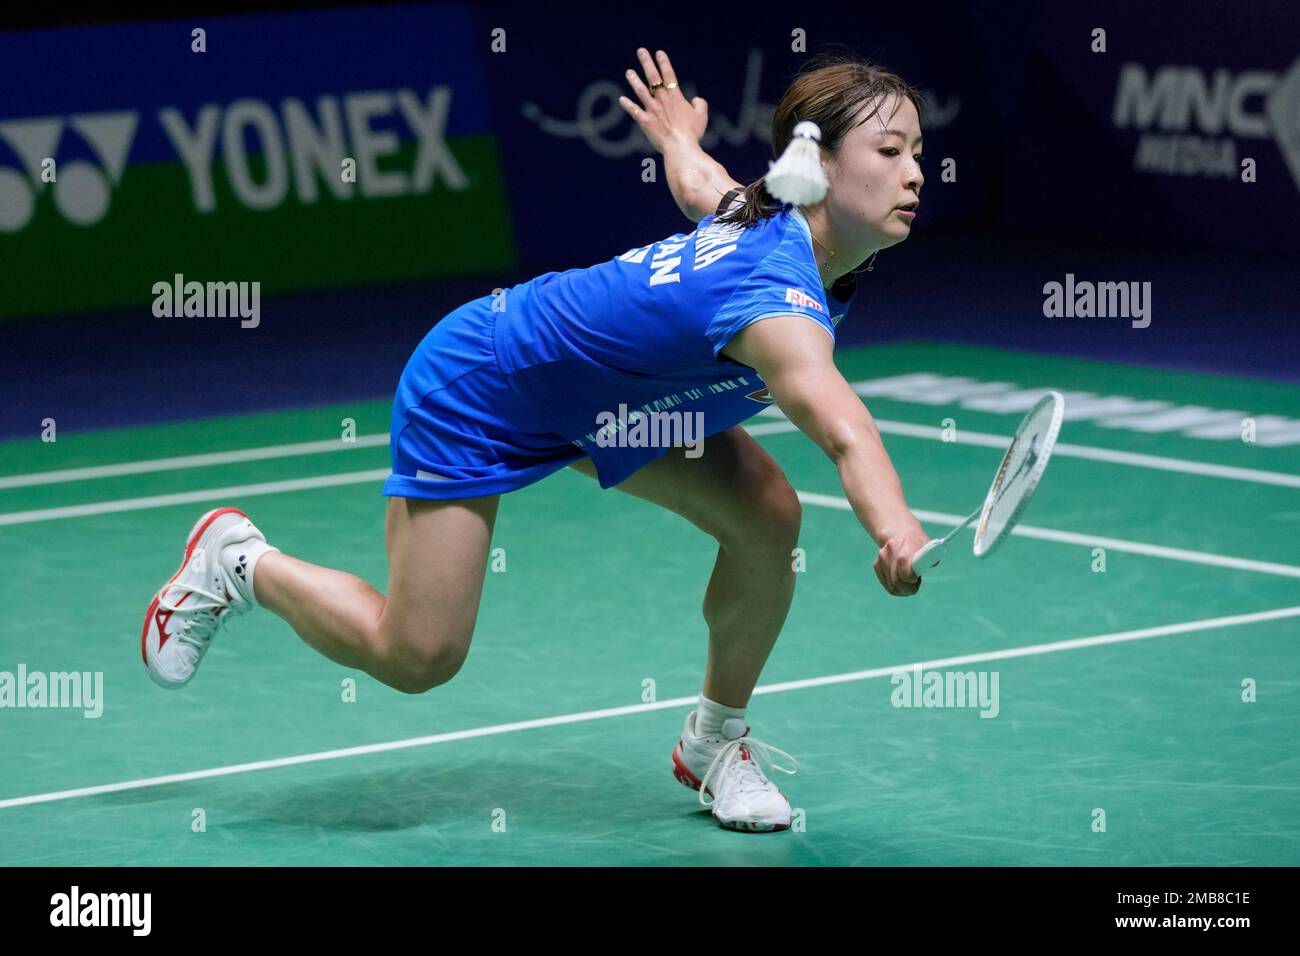 Japans Nozomi Okuhara competes against Chinas Chen Yu Fei during their womens singles quarterfinal match at Indonesia Open badminton tournament at Istora Gelora Bung Karno Stadium in Jakarta, Indonesia, Friday, June 17,